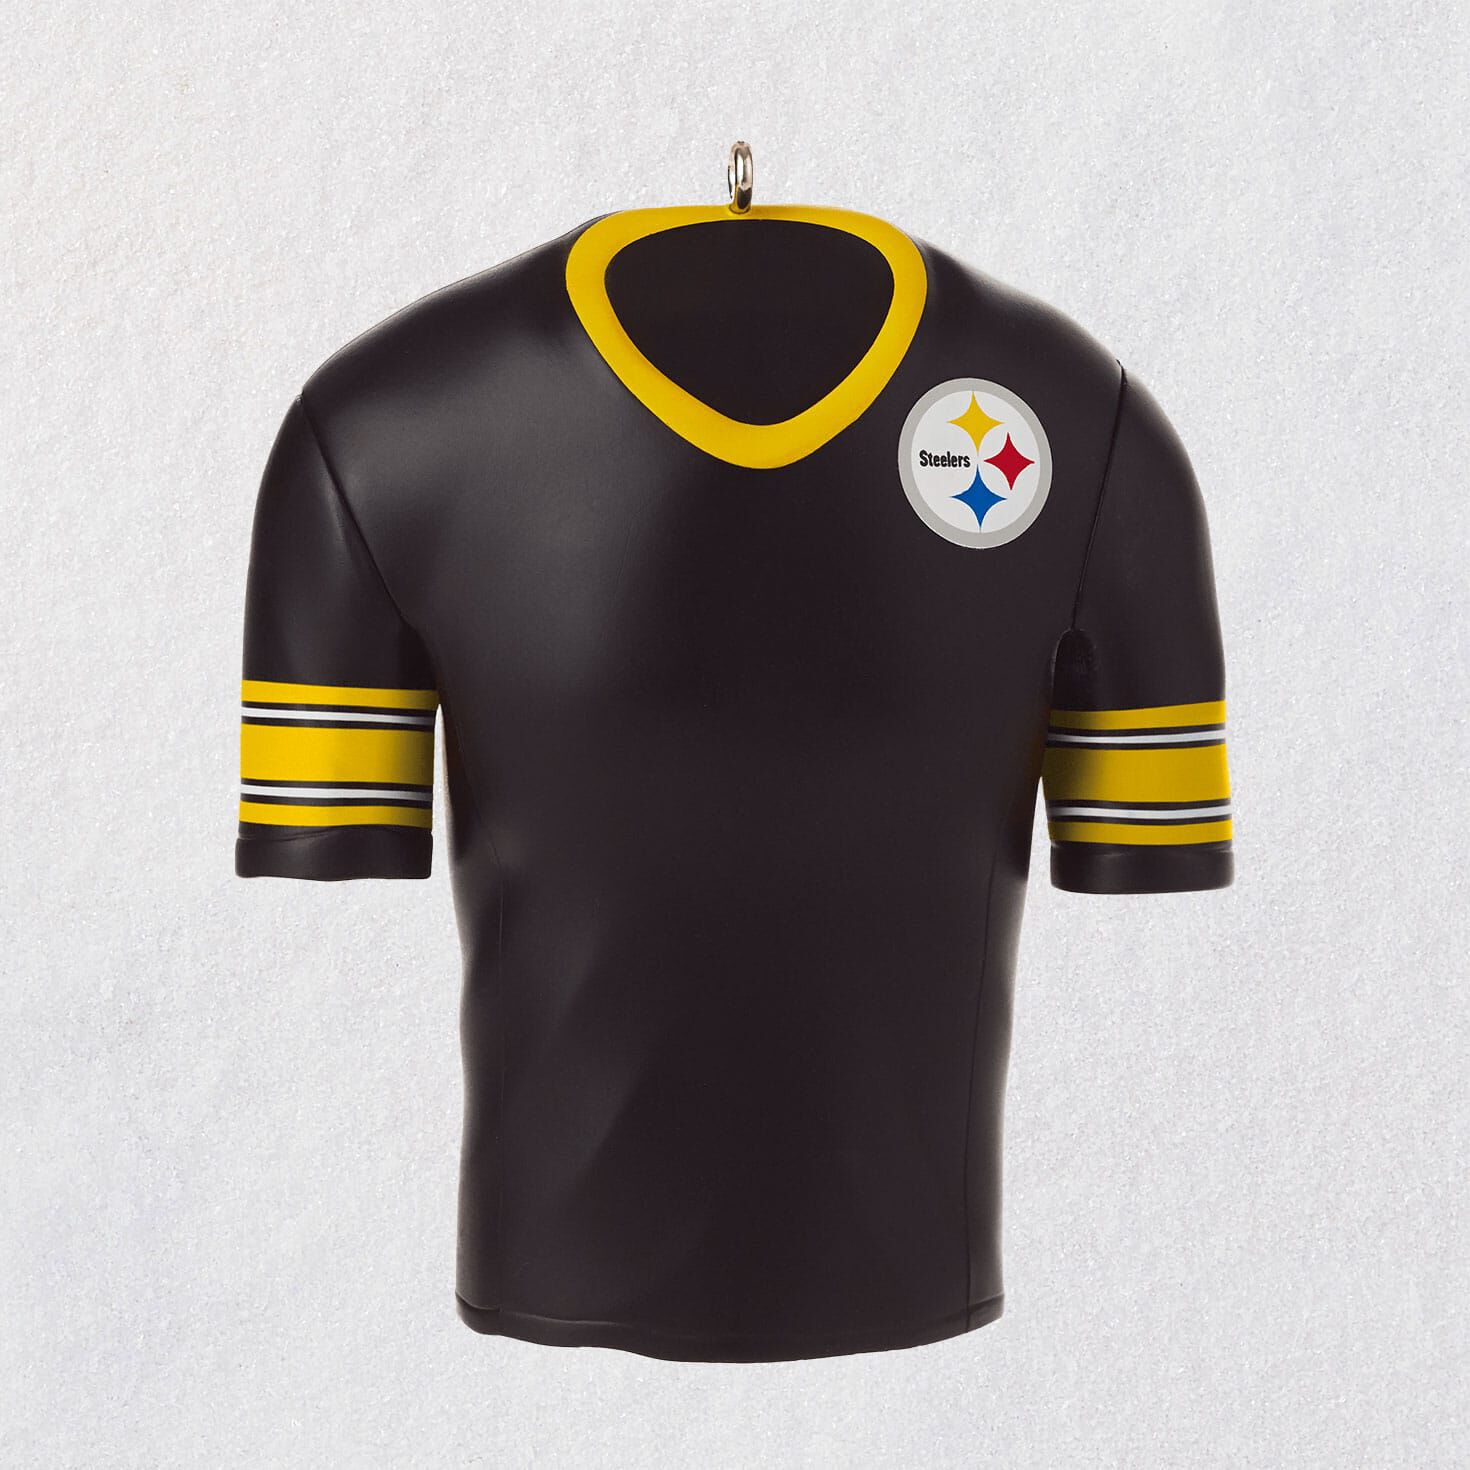 where can i get a steelers jersey